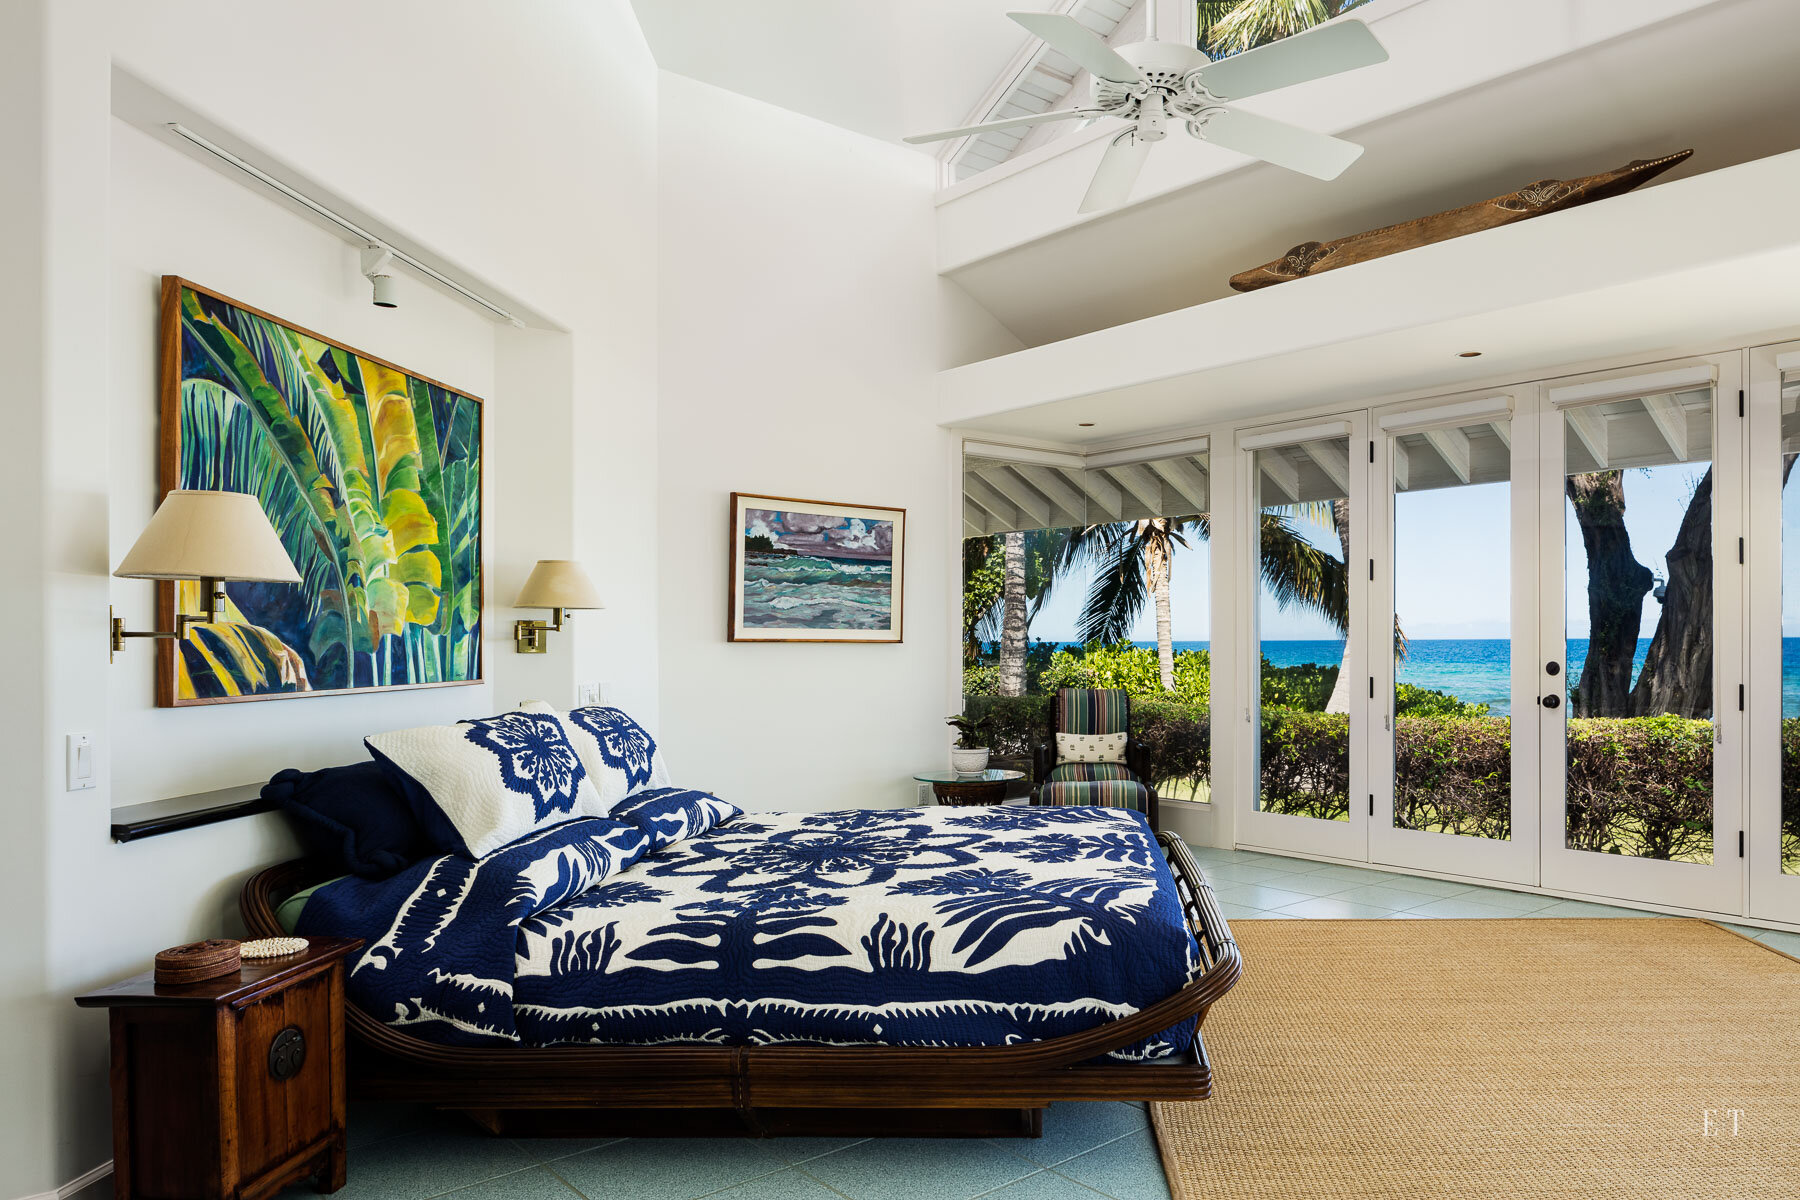  Ocean Views from the Master Bedroom 